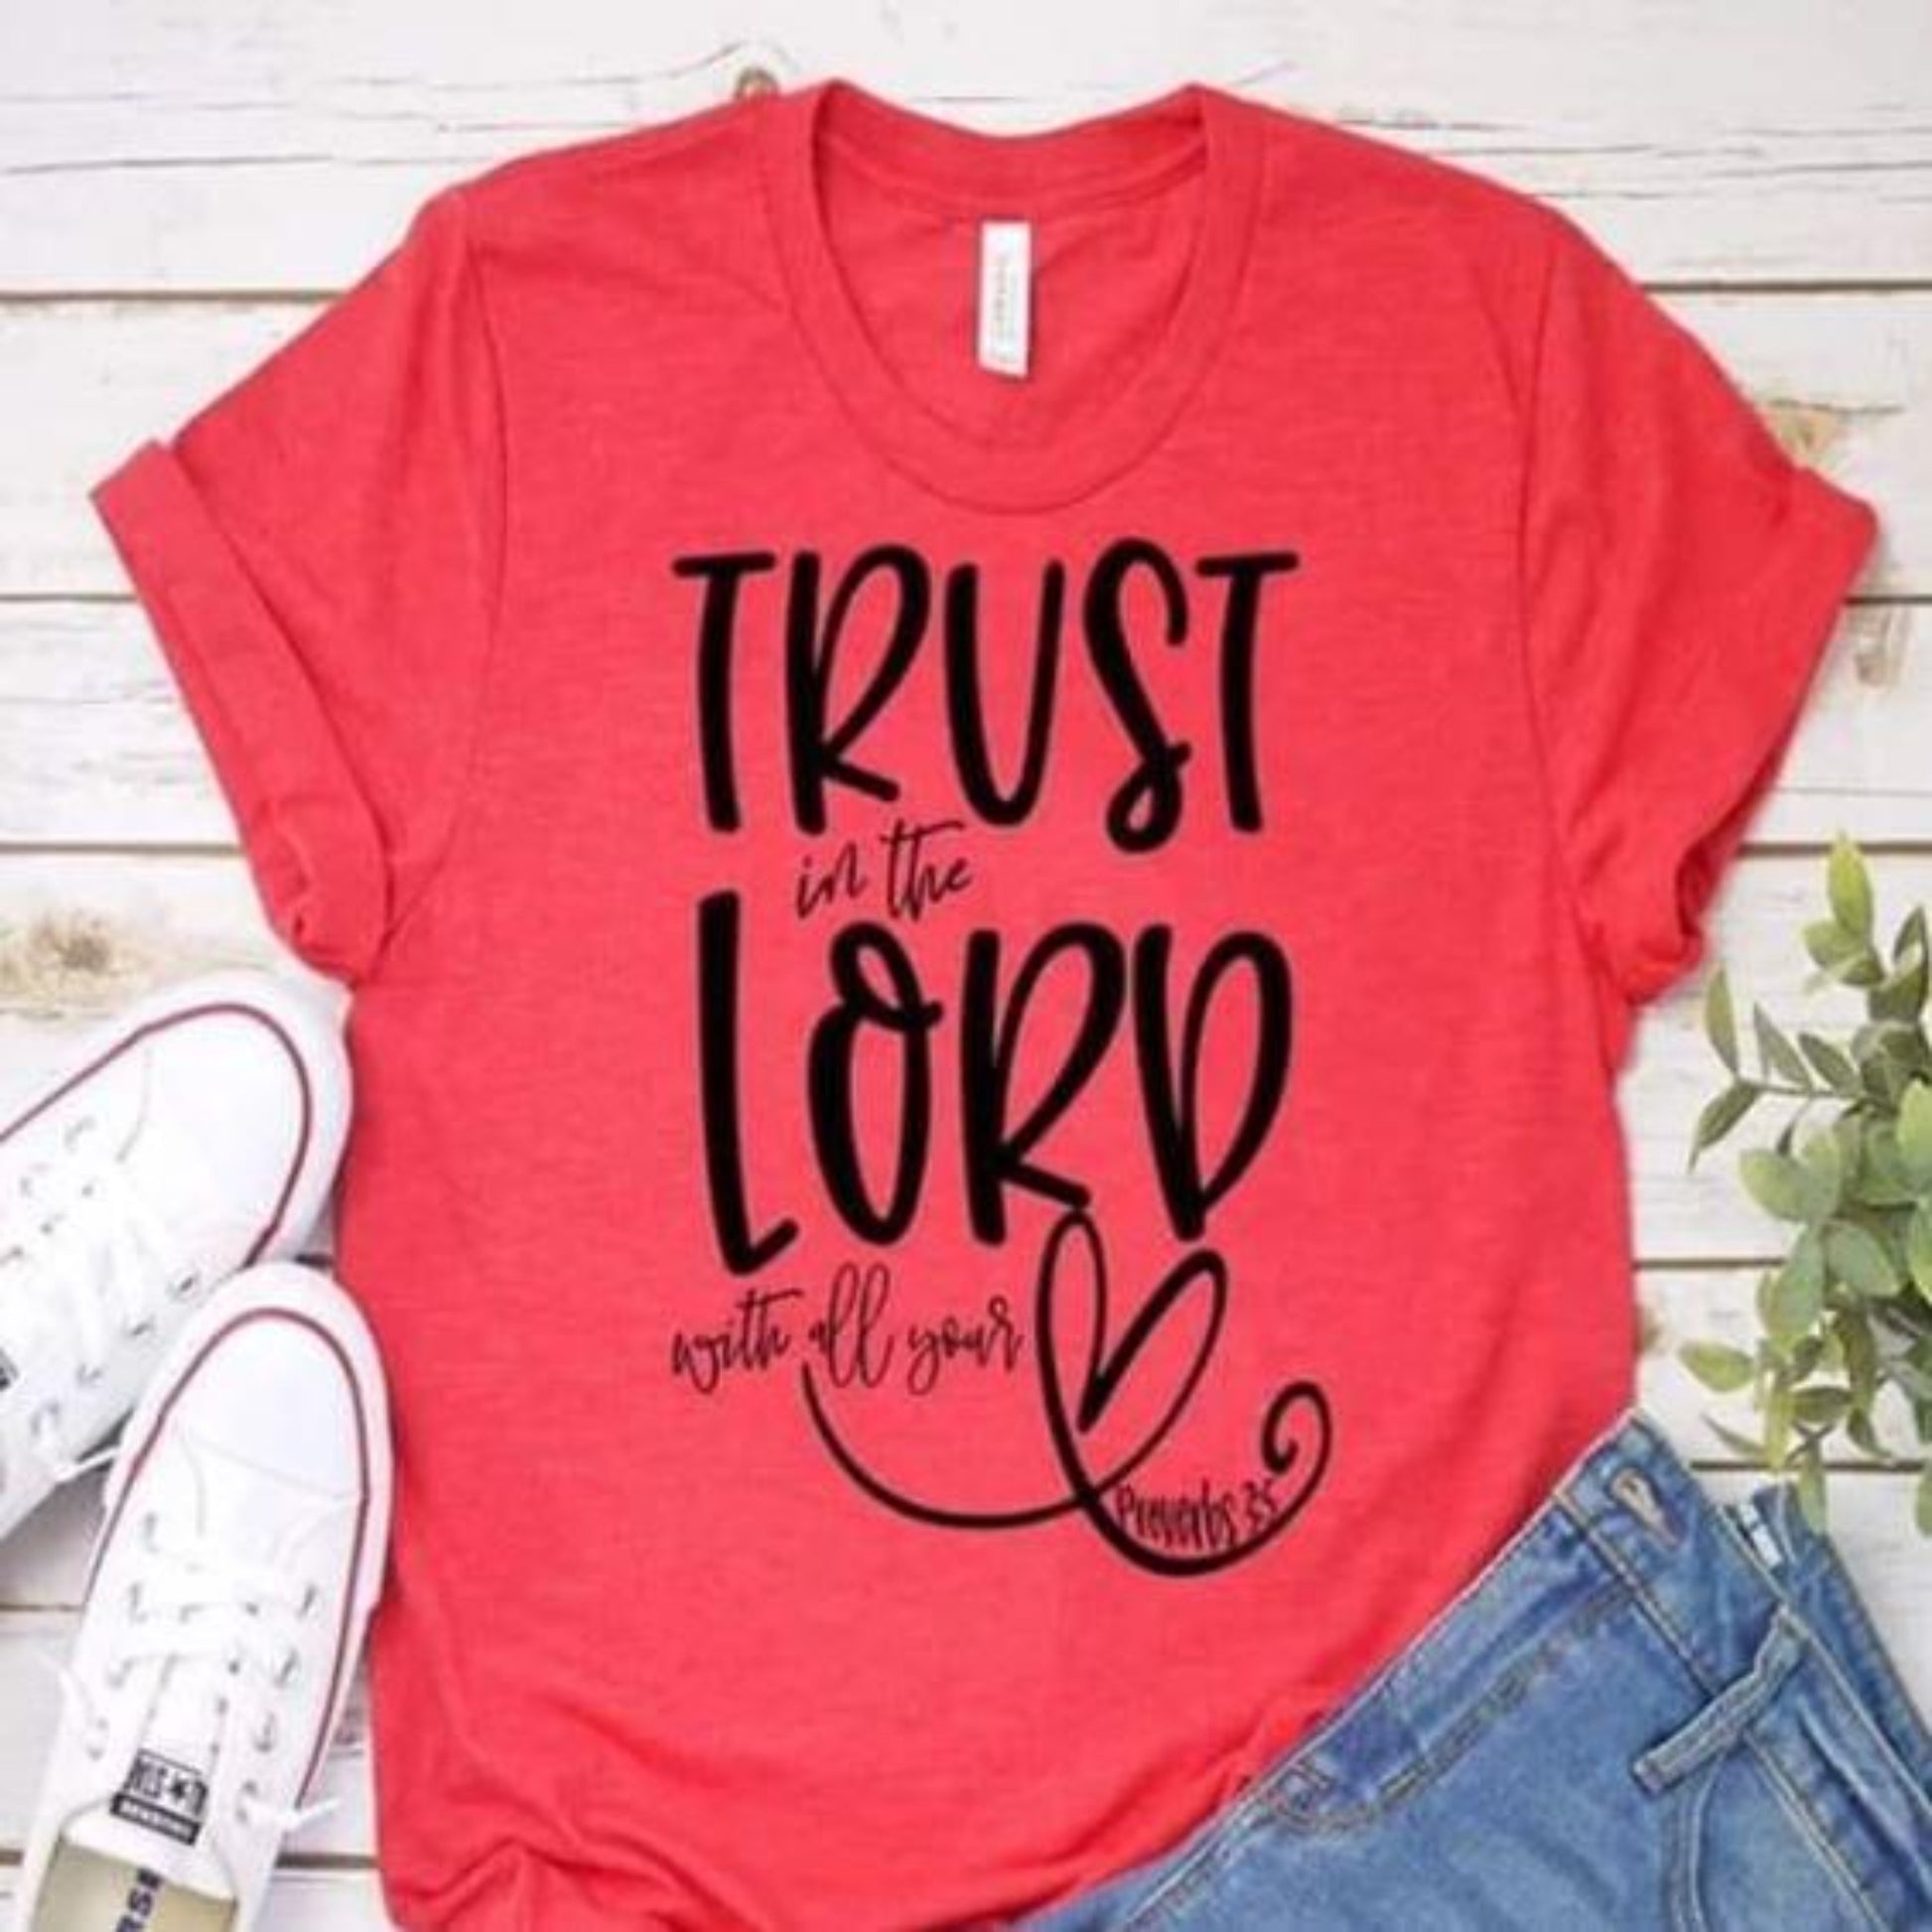 trust_Lord_heart specialty tee comfortable shirt casual wear everyday tshirt